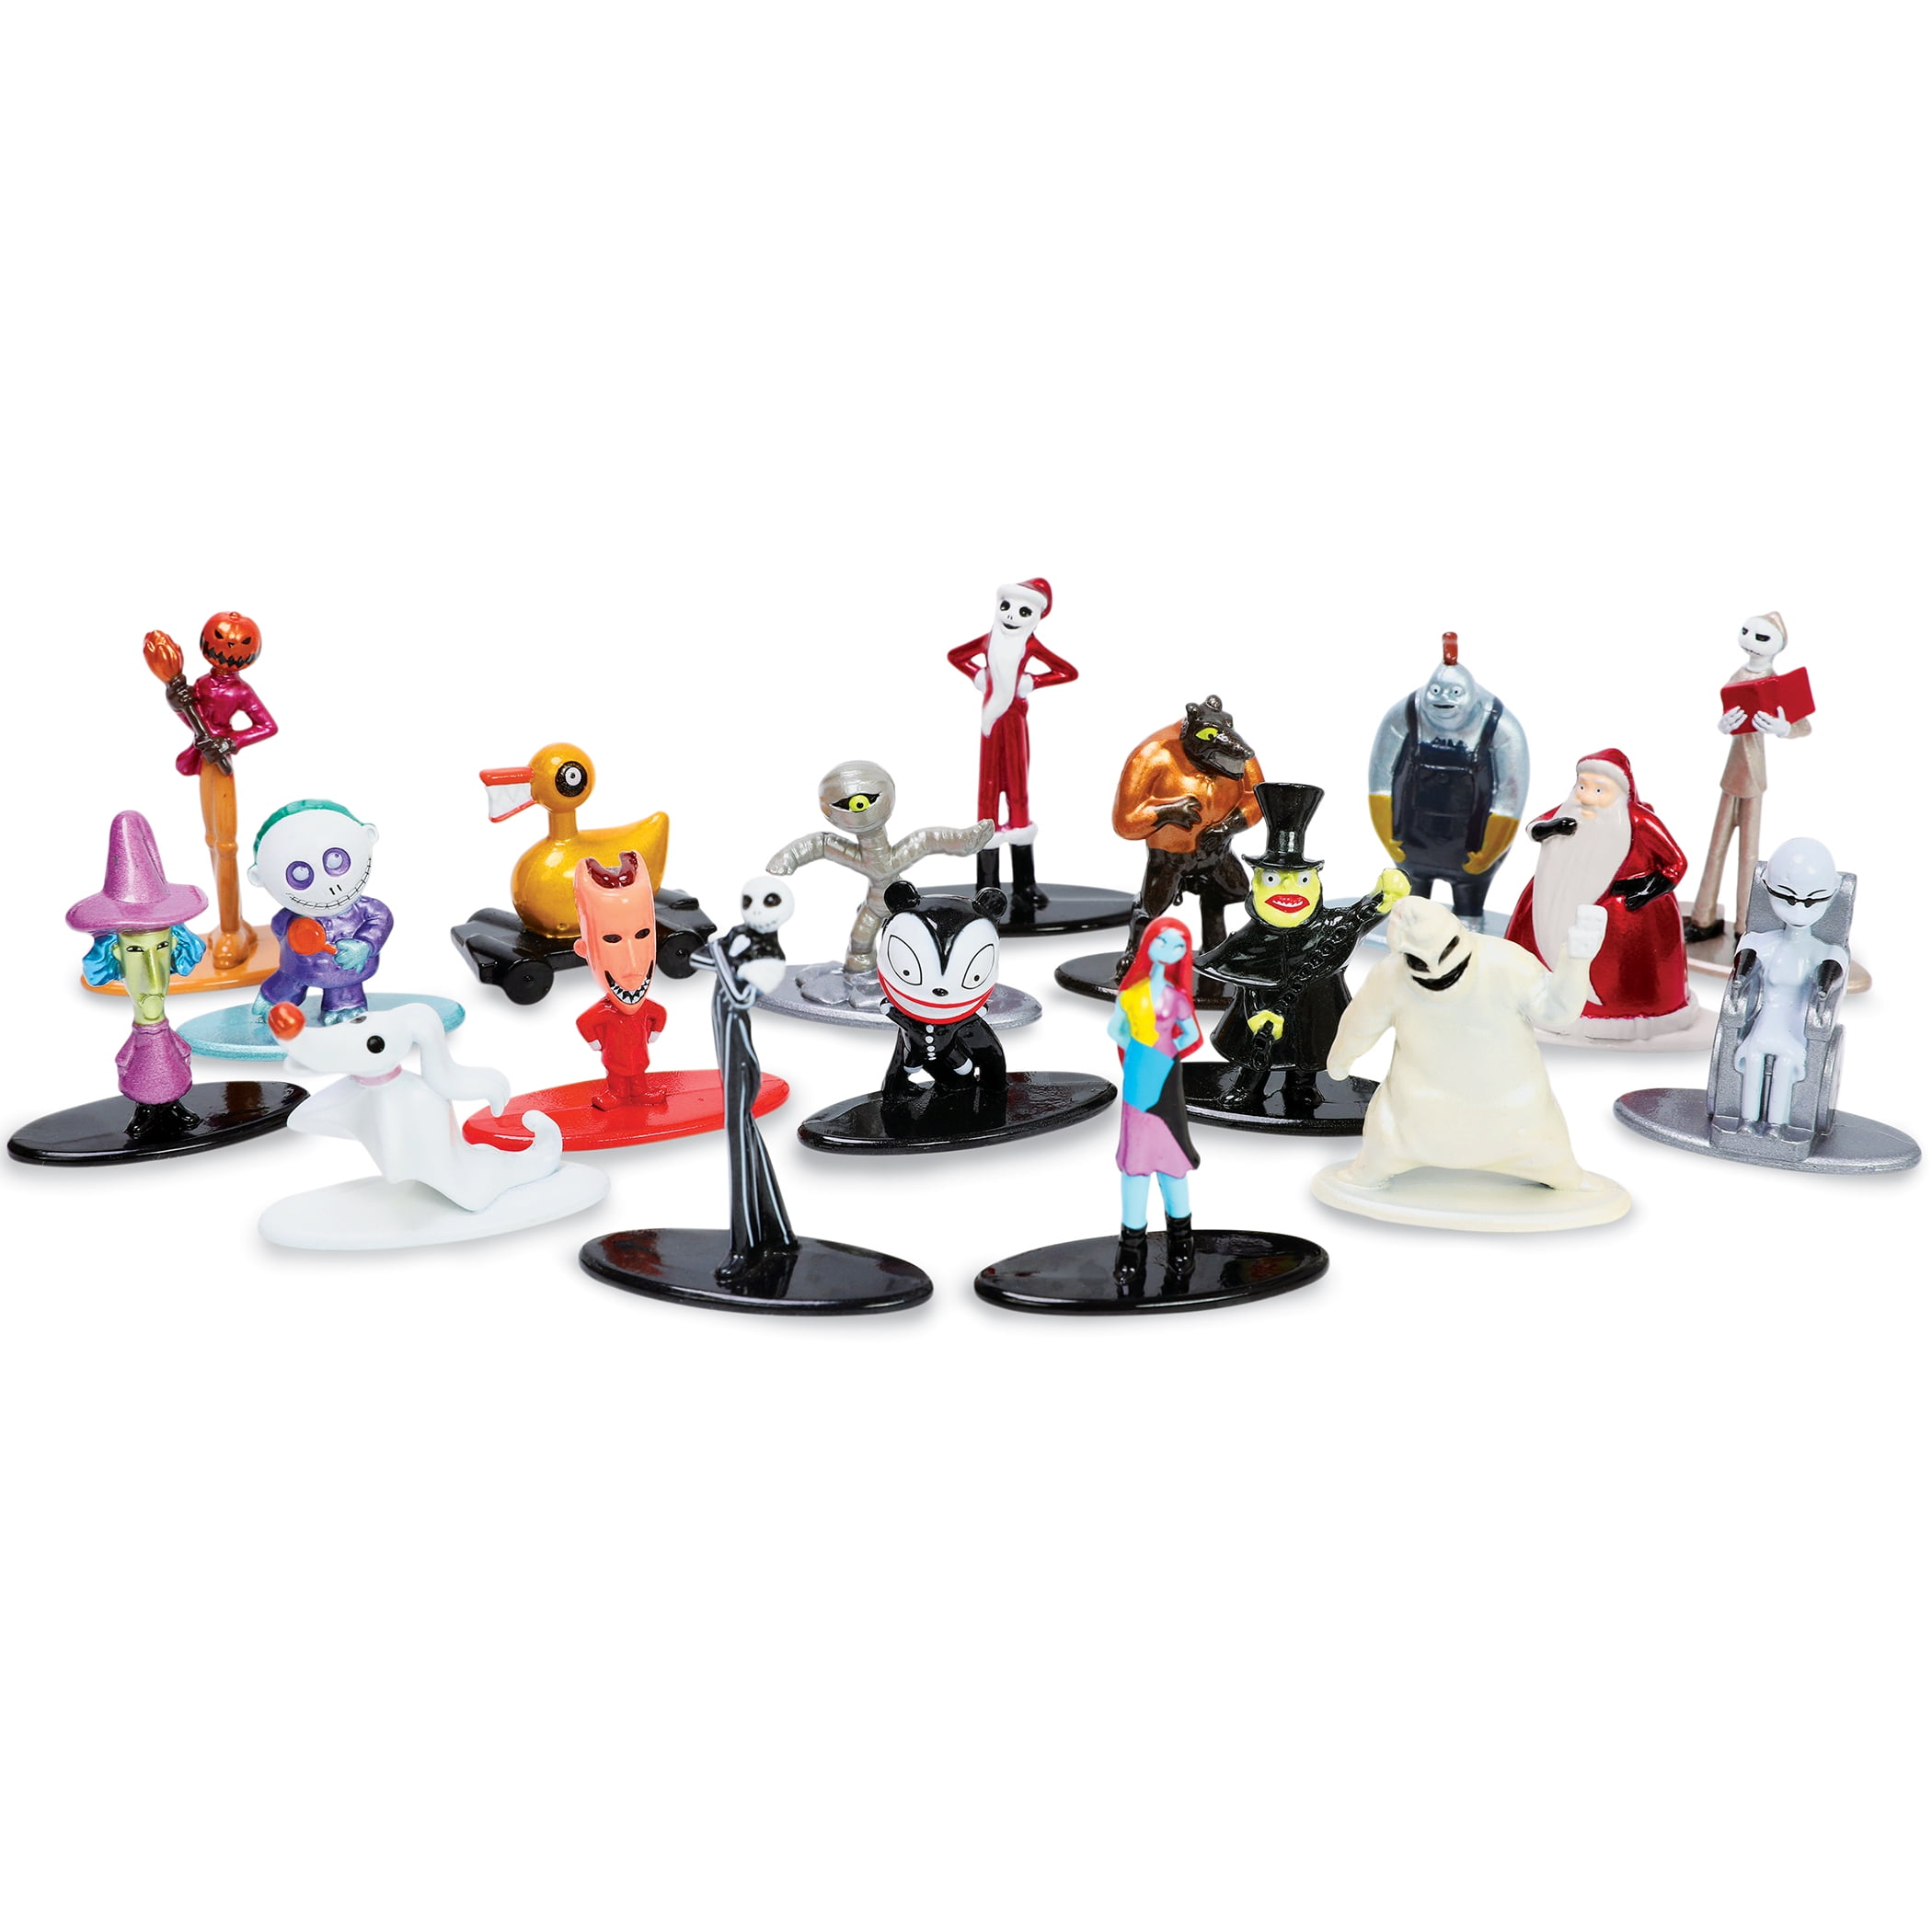 Details about   7pcs set  The Nightmare Before Christmas Mini Figures Jack Skellington Toy Gift 